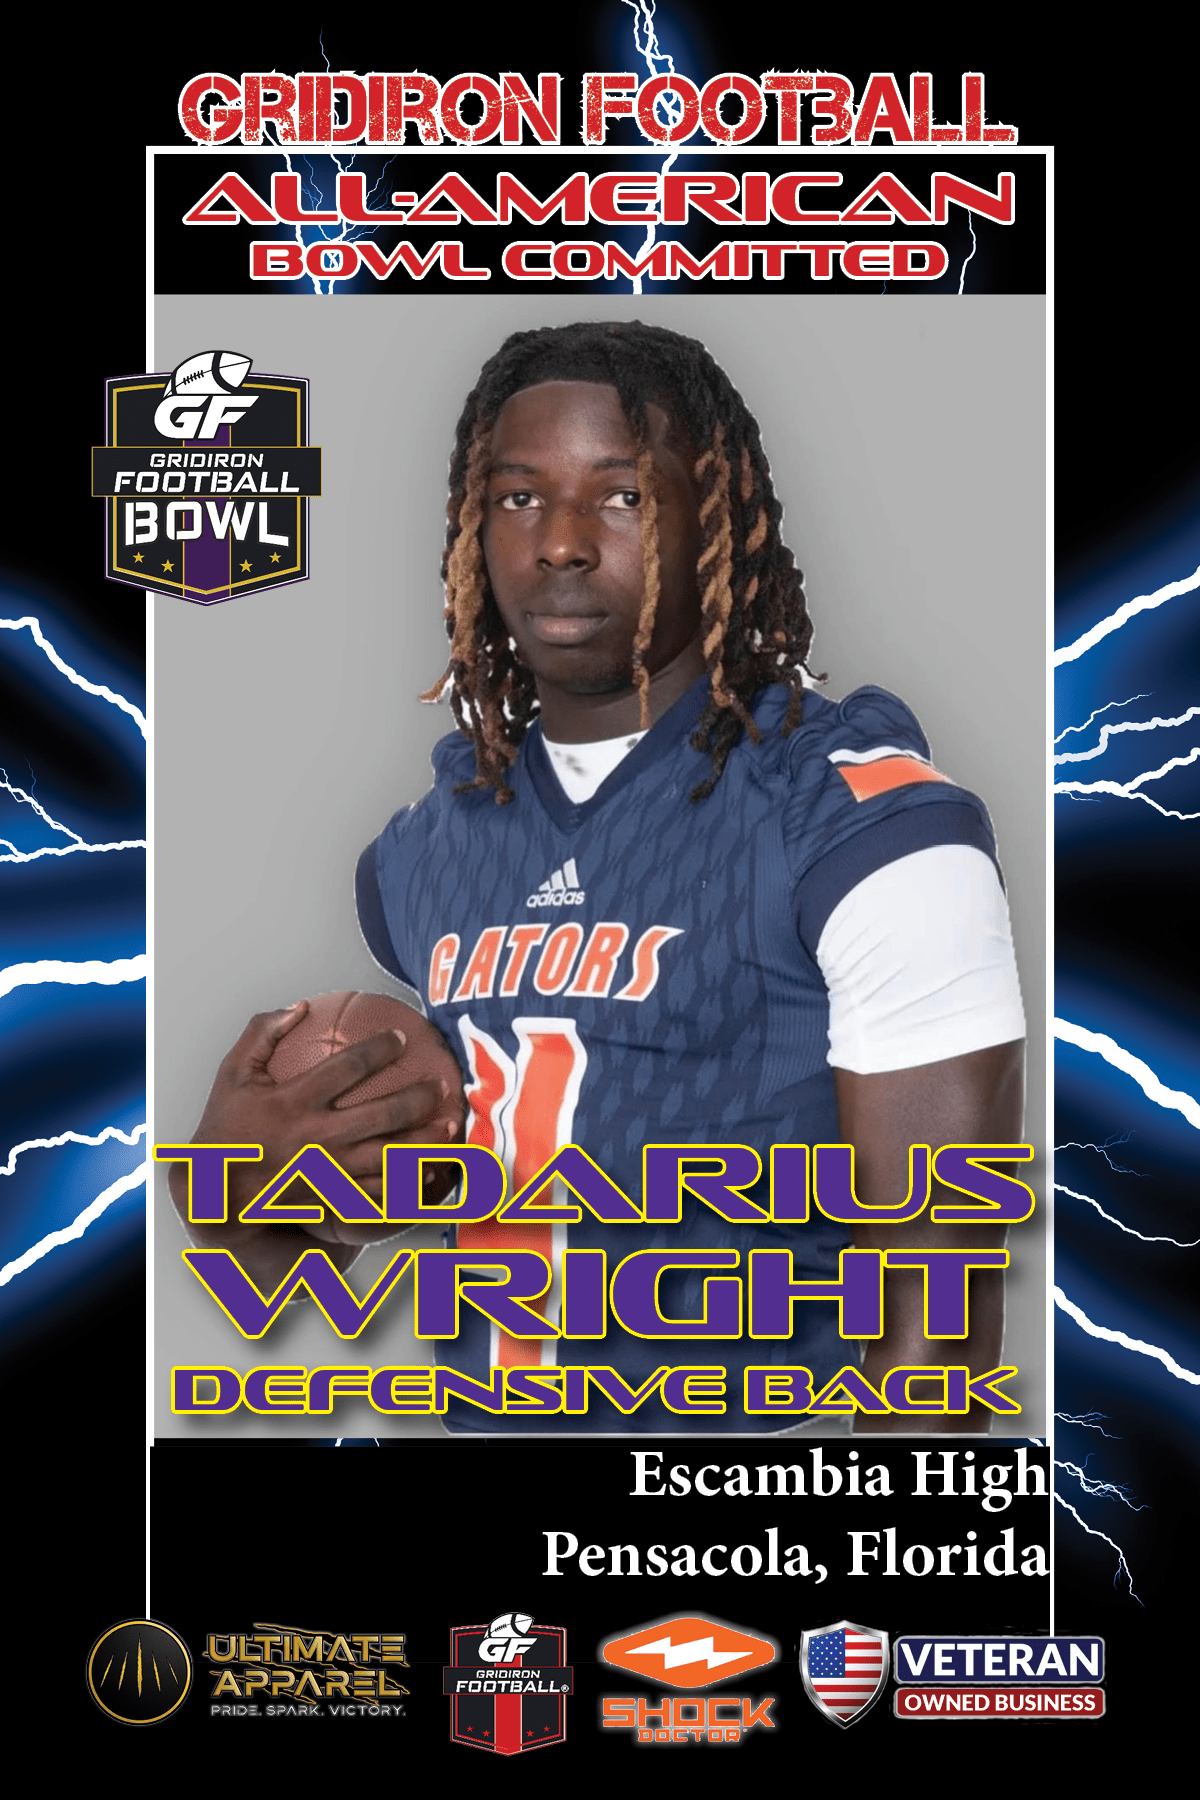 BREAKING NEWS: Escambia High School (Pensacola, Fla.) DB Tadarius Wright has committed to play in the 2023 Gridiron Football All-American Bowl